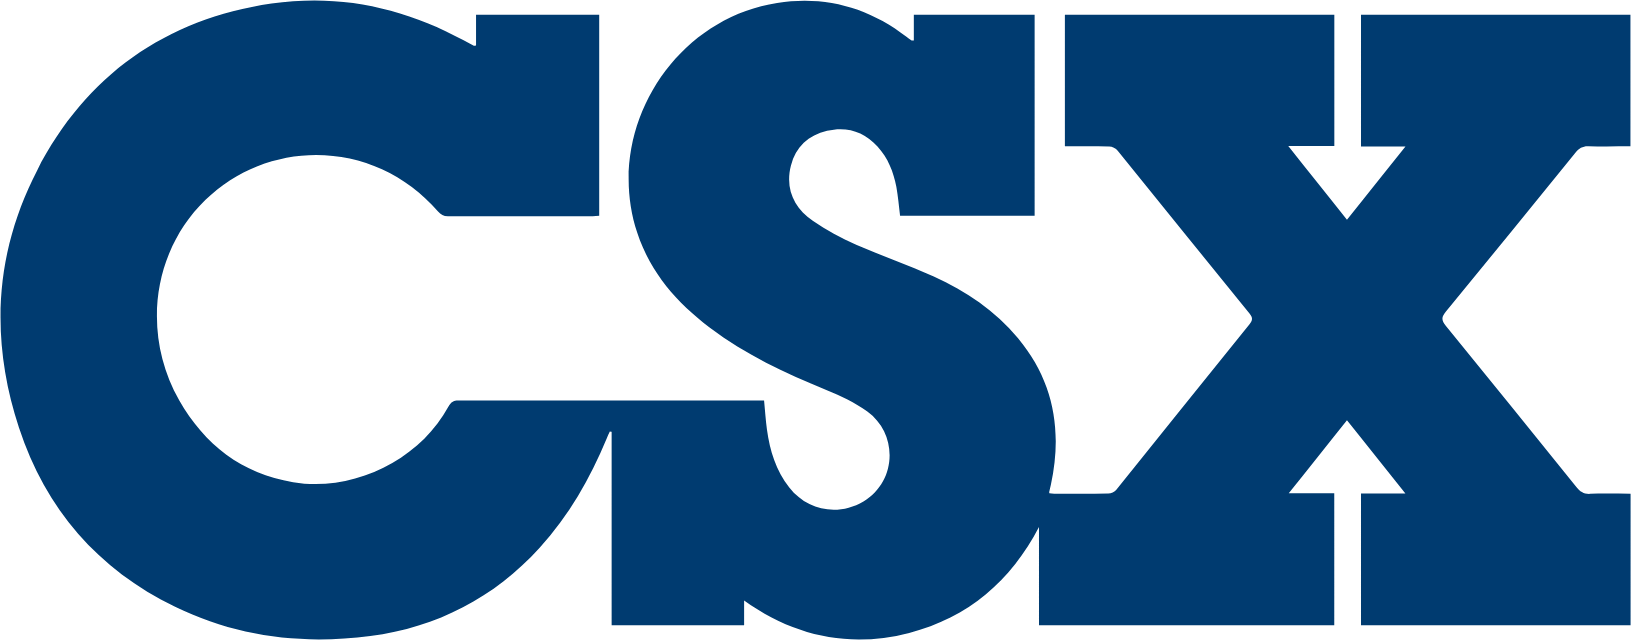 CSX Corporation logo in transparent PNG and vectorized SVG ...